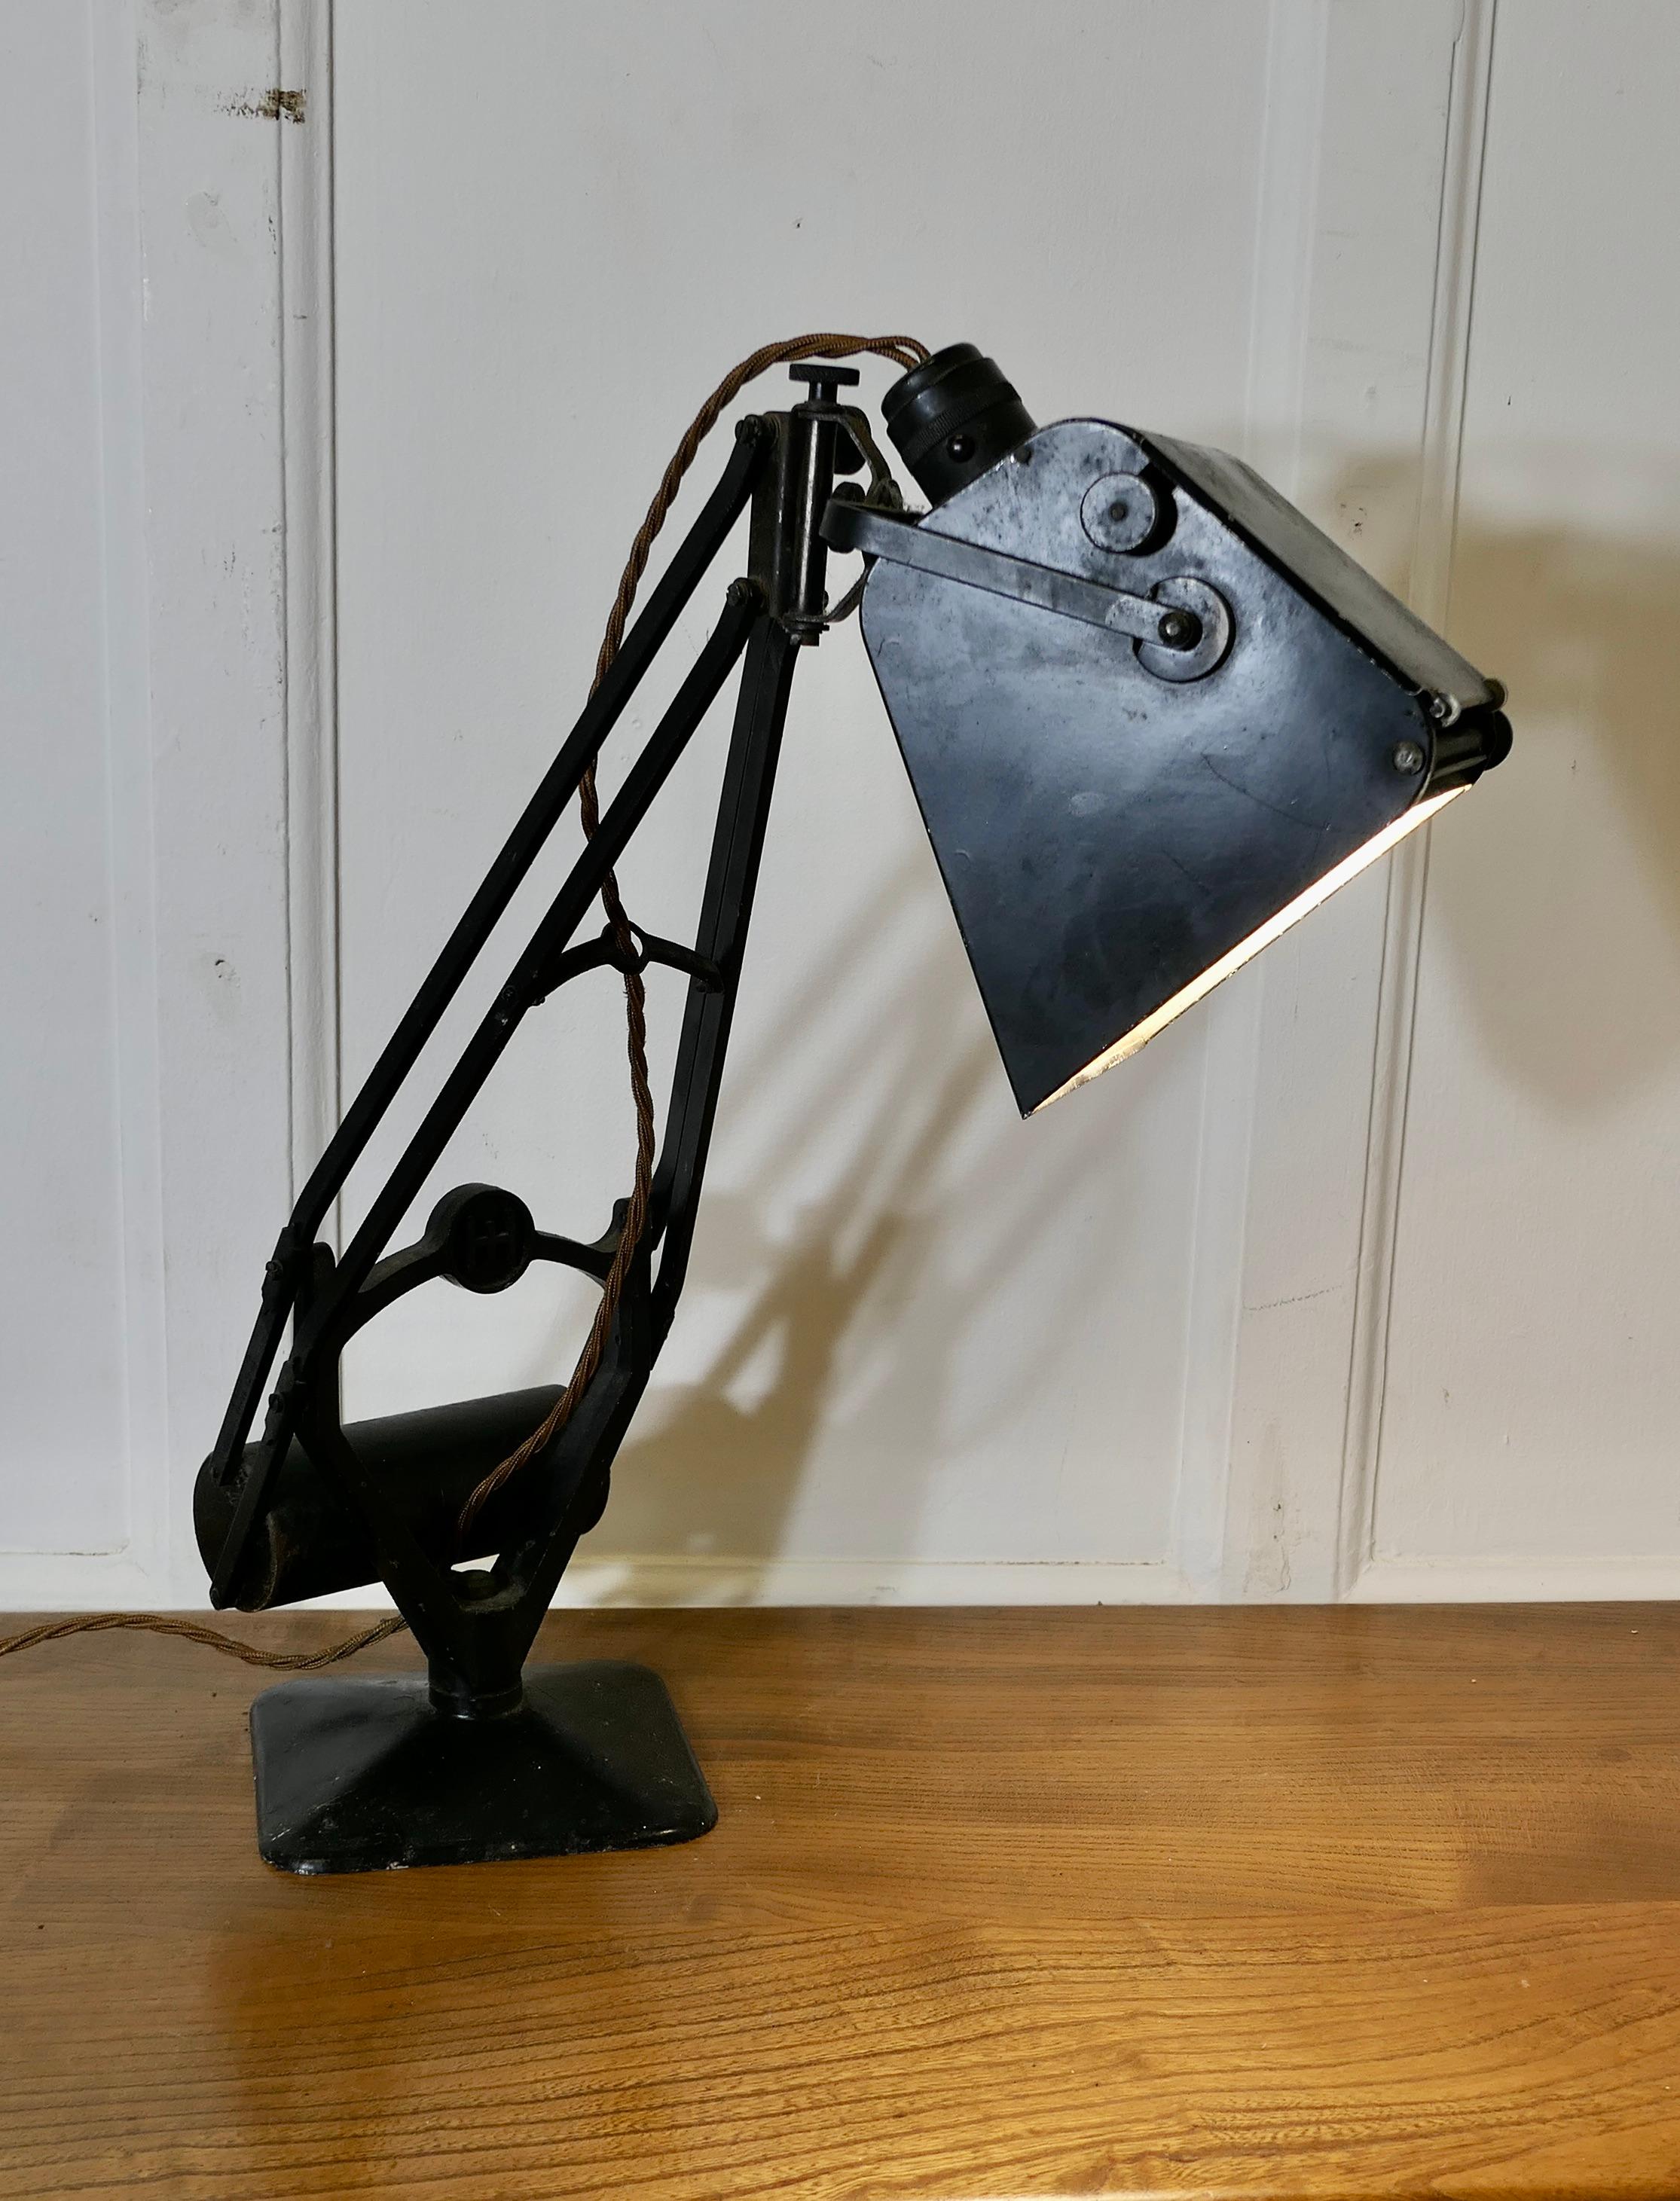 Hadrill Horstmann Pluslite Magnifying Industrial  Desk Lamp 


Very rare in original condition Horstmann Pluslite model Desk/Work lamp, in full working order. it has their iconic roller counterbalance design with an adjustable frame and shade, it